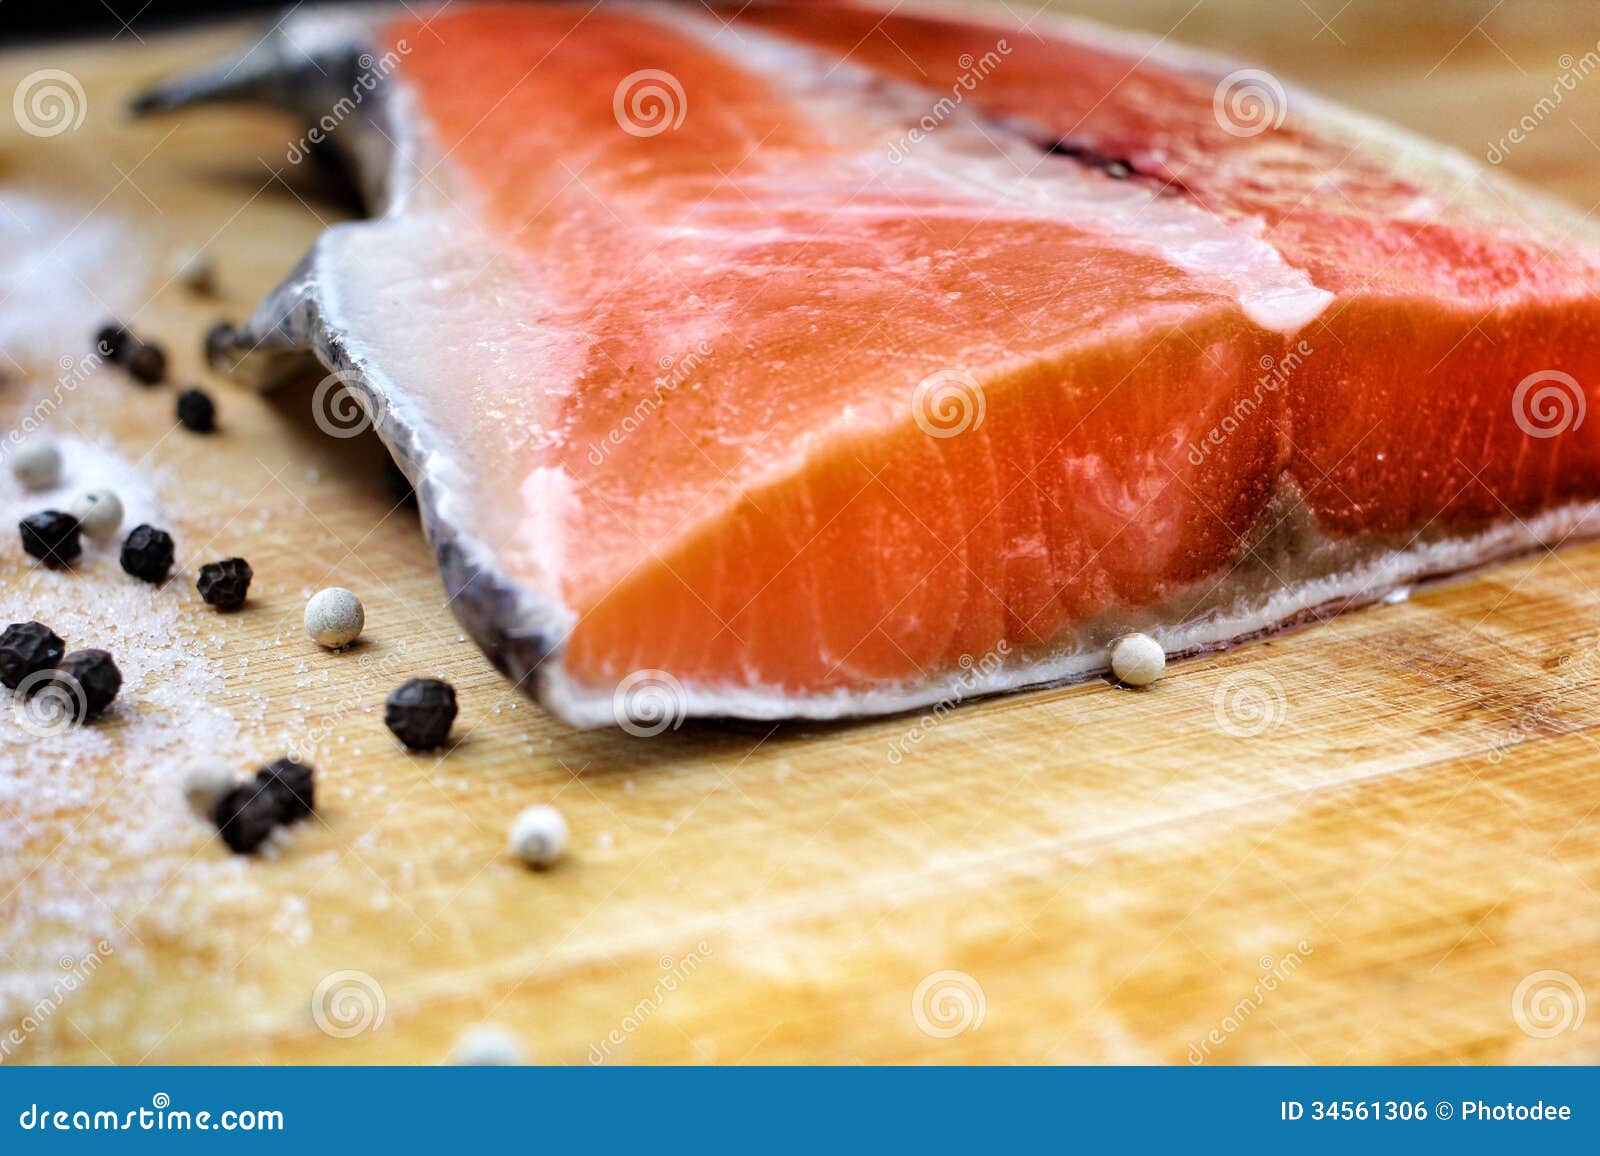 Fresh salmon with spices stock photo. Image of fillet - 34561306